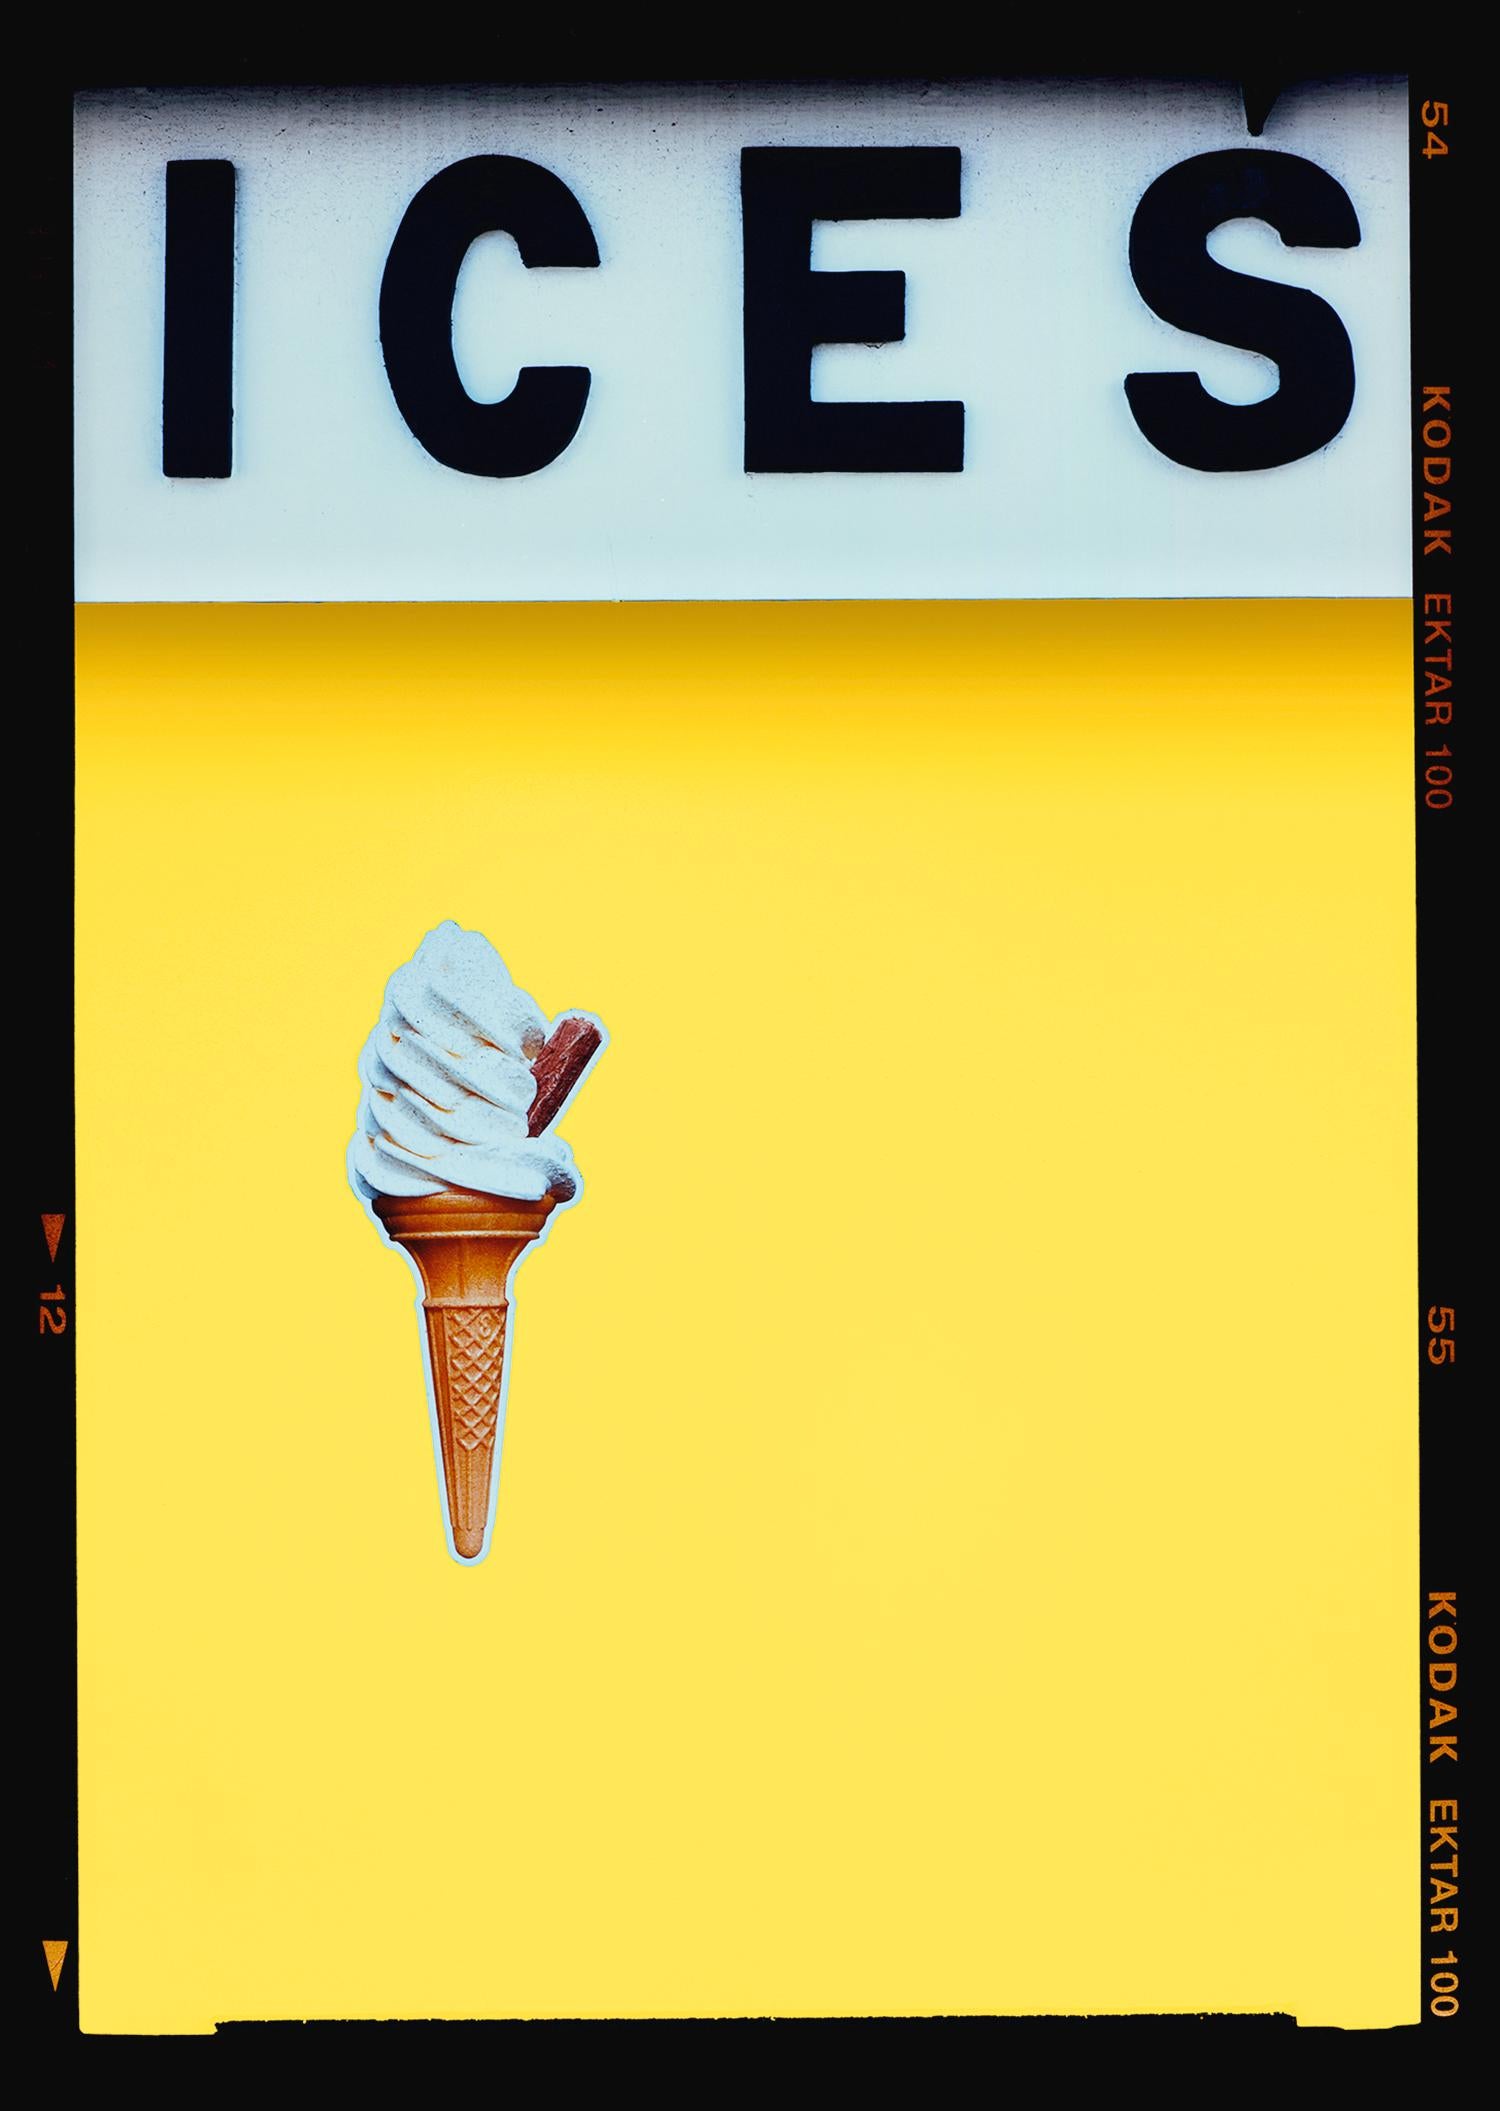 Richard Heeps Color Photograph - Ices (Sherbet), Bexhill-on-Sea - British pop art color photography